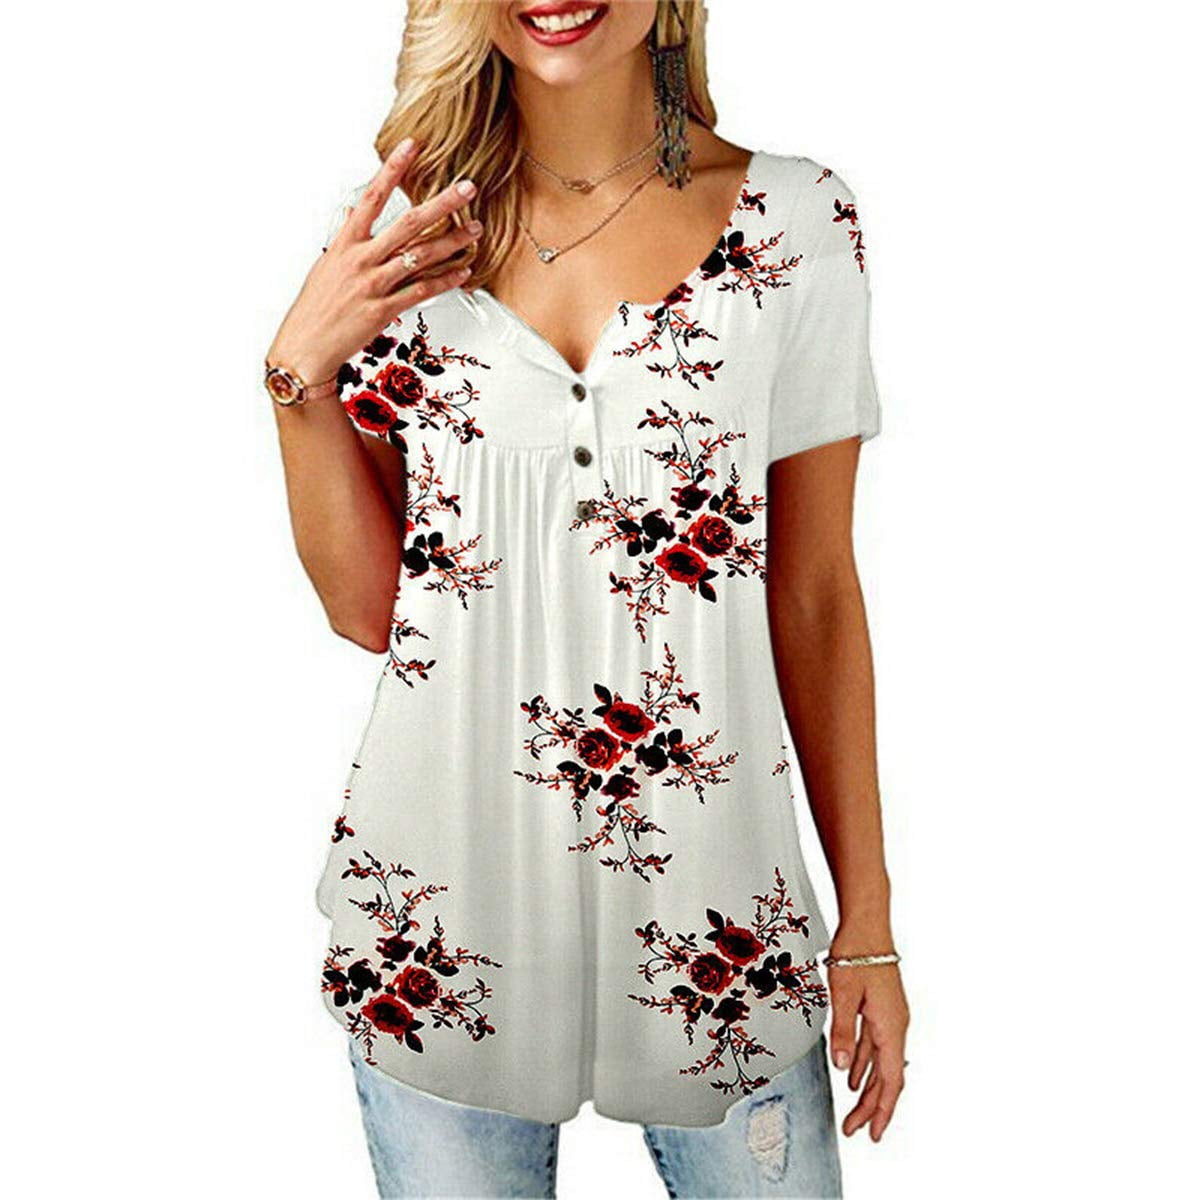 Short Sleeve Tee Blouse for Women,Forthery Womens Button-Down Short Sleeve T Shirts V-Neck Floral Print Casual Tops S-5XL 